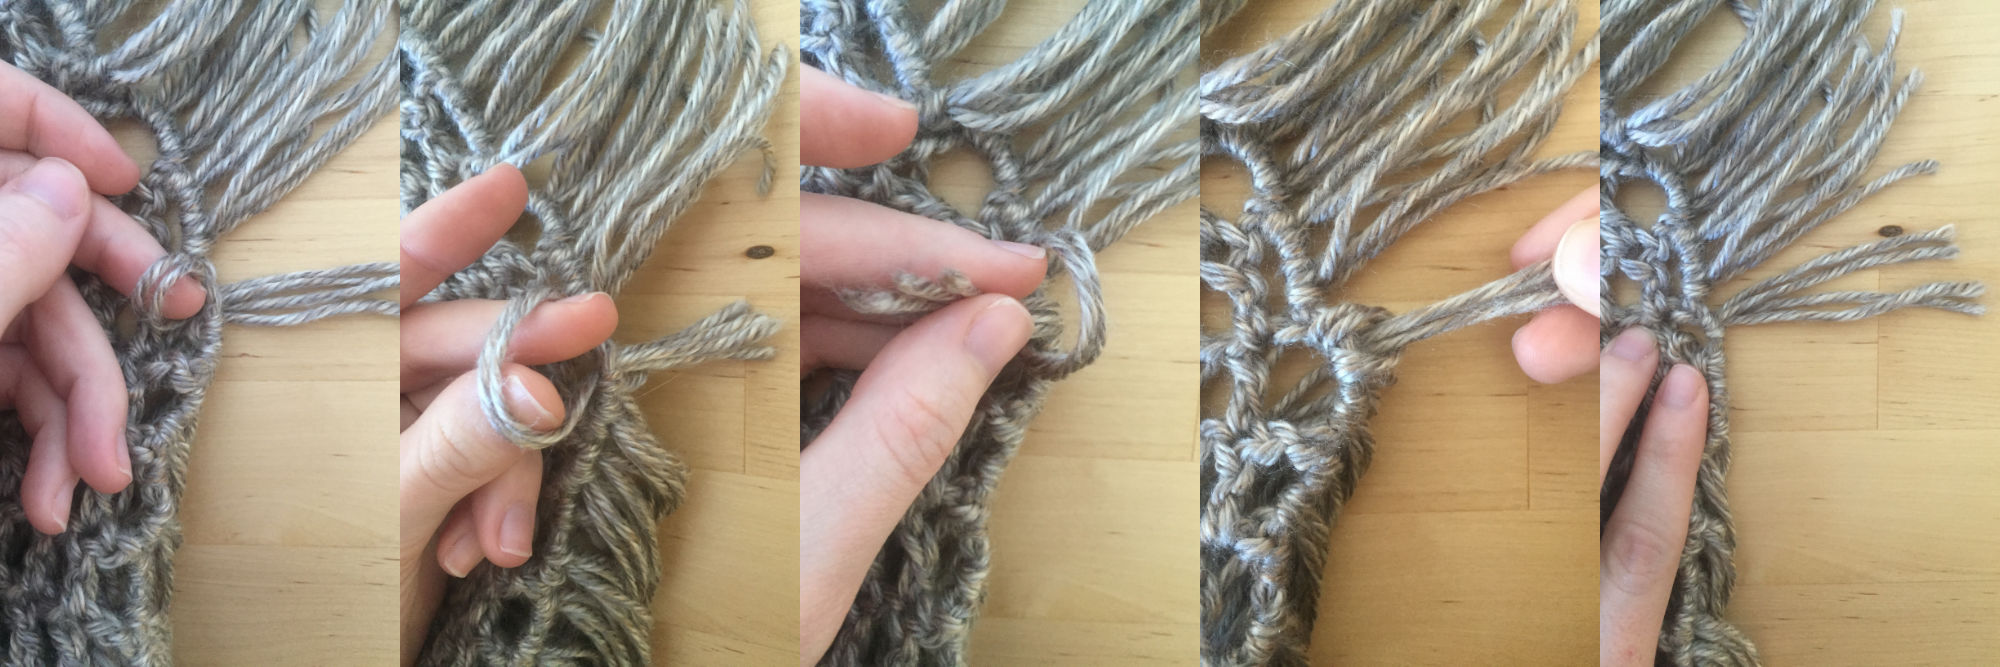 process of adding fringe to the scarf